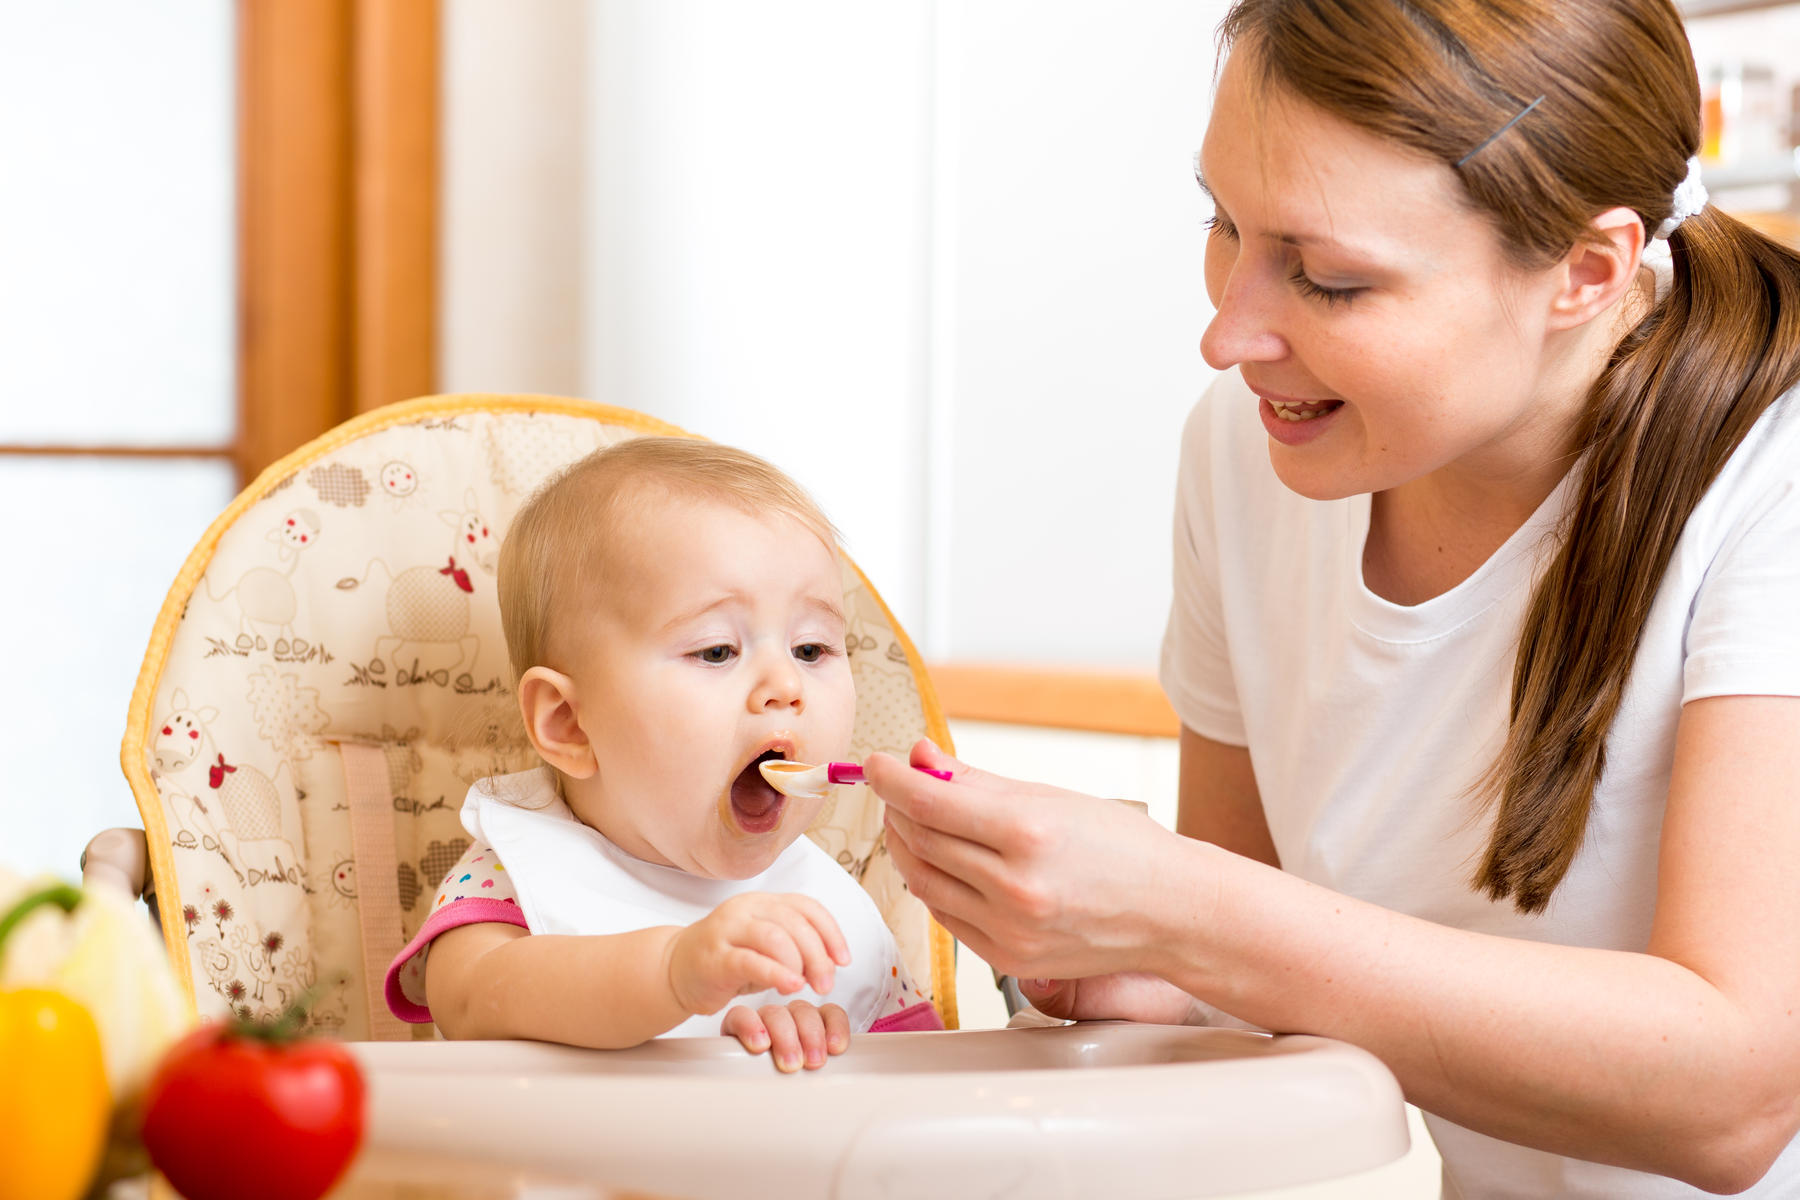 Offer Your Toddler A Light Snack Or Meal Before Nap Time